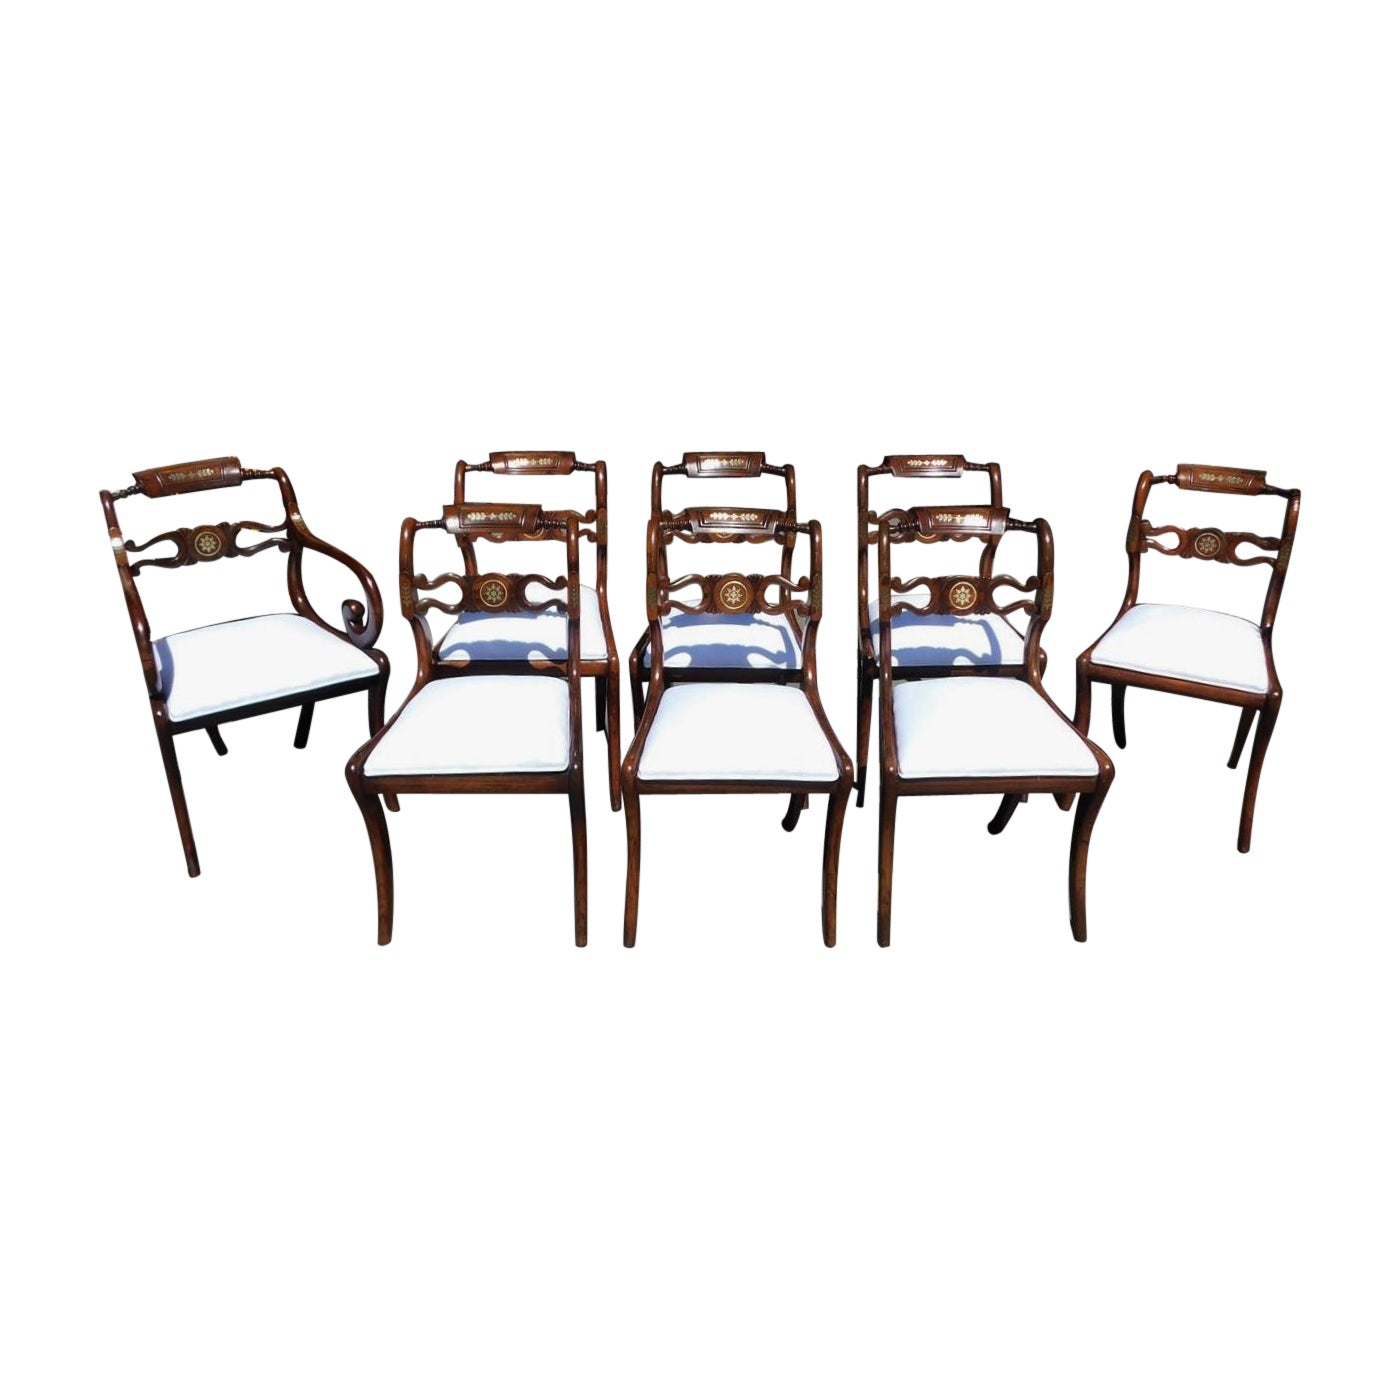 English Regency Set of Eight Kingwood Brass Inlaid Dining Room Chairs, C. 1800 For Sale